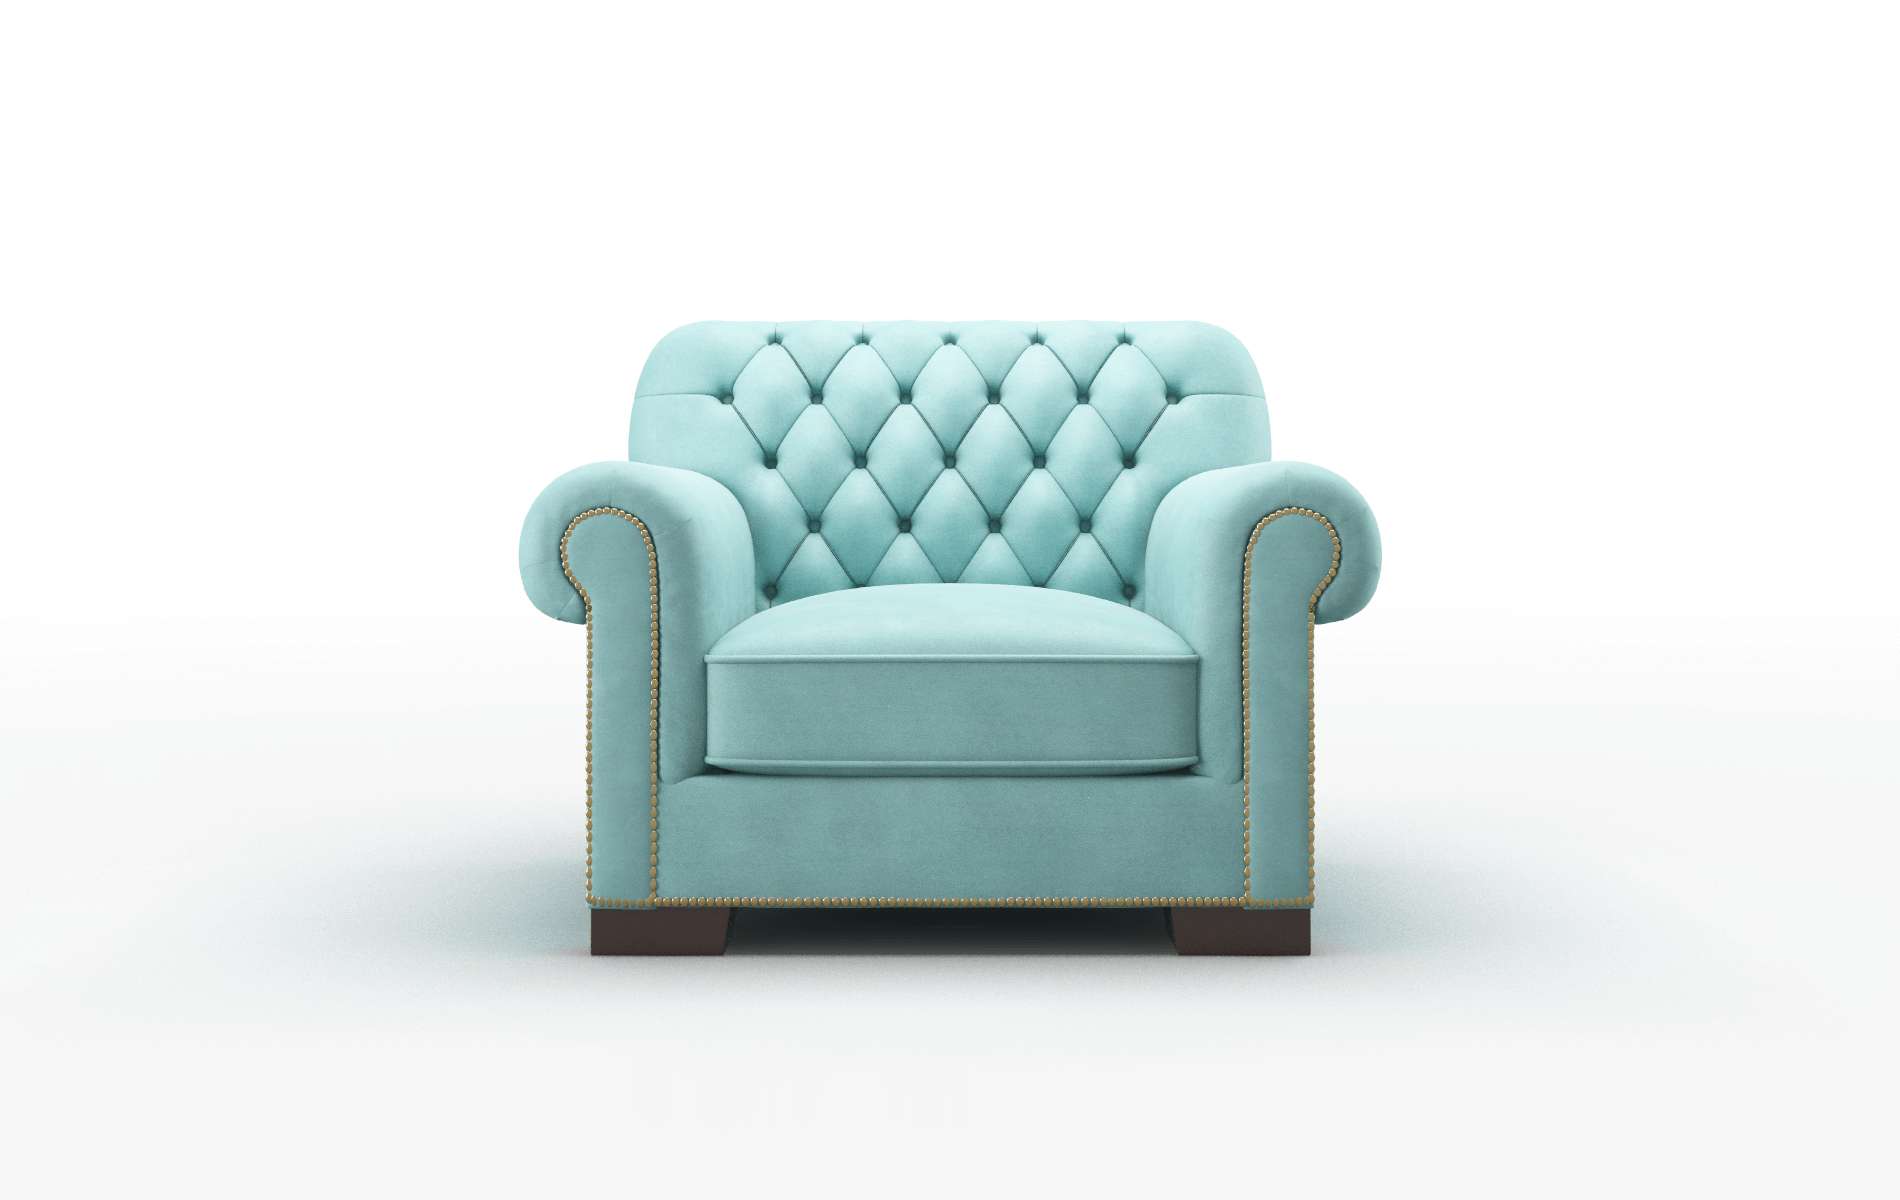 Chester Curious Turquoise Chair espresso legs 1